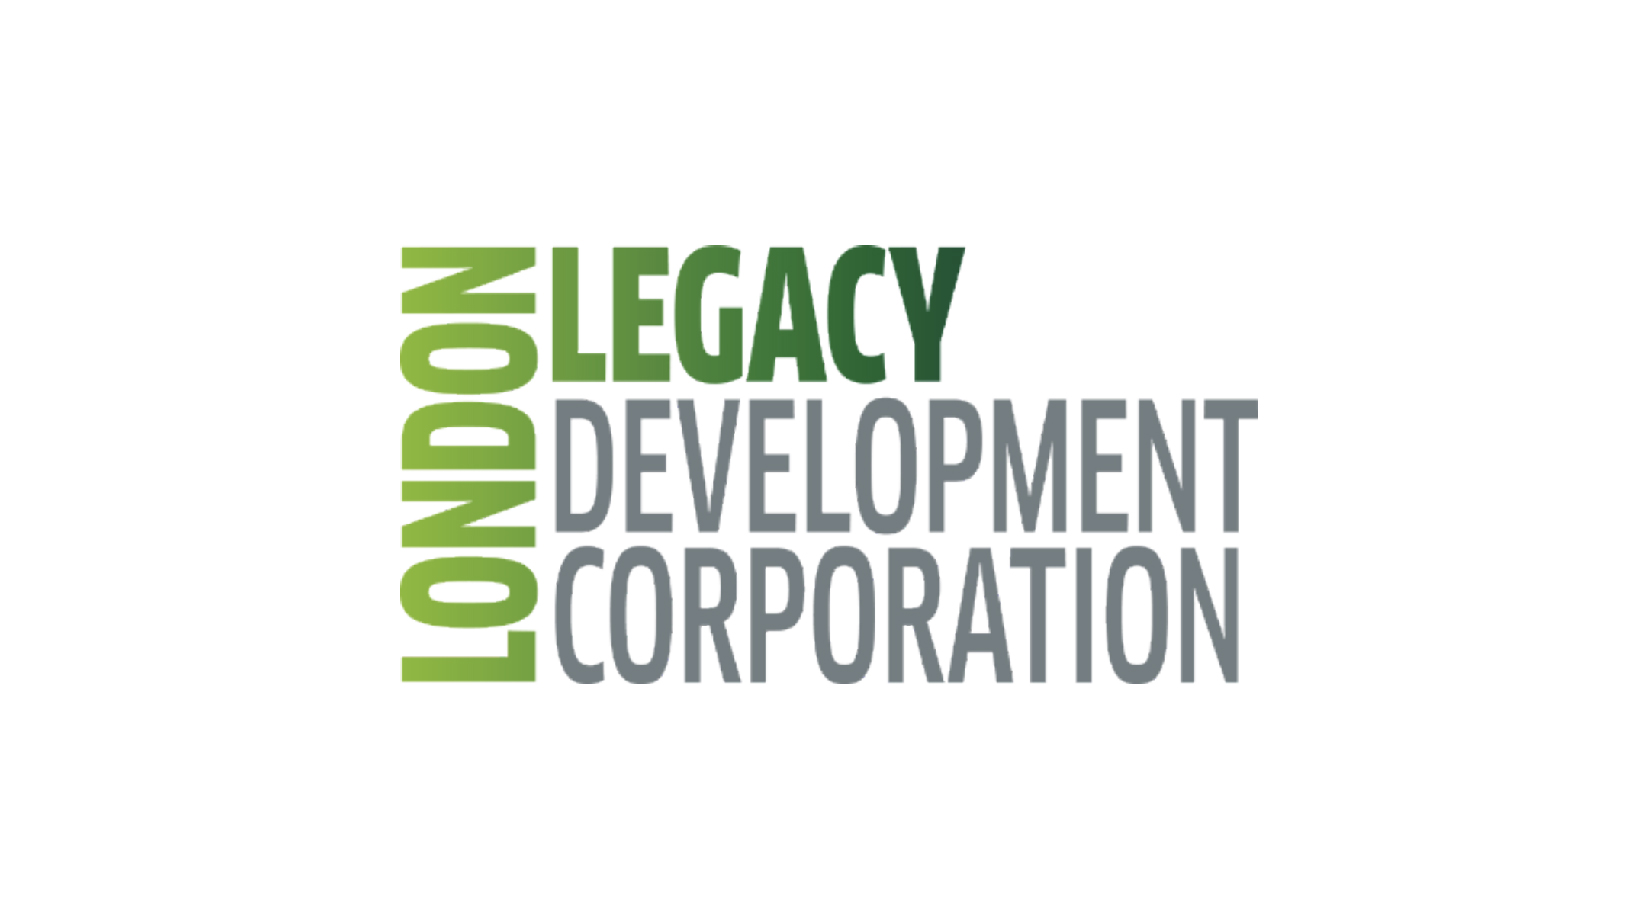 Plans approved by the London Legacy Development Corporation